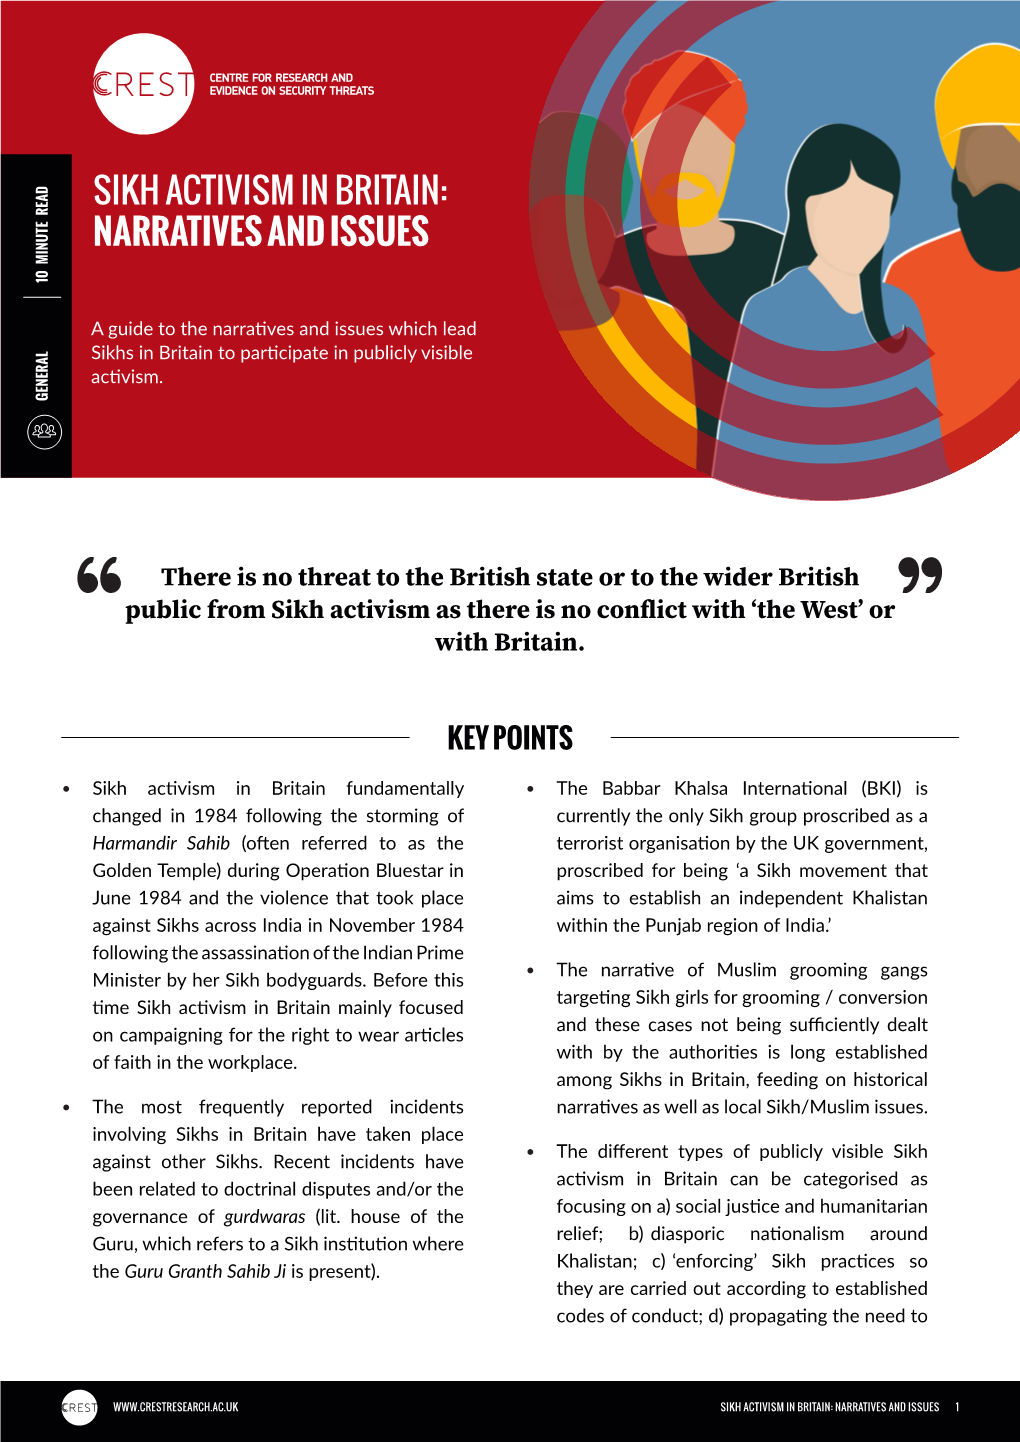 Sikh Activism in Britain: Narratives and Issues 10 Minute Read